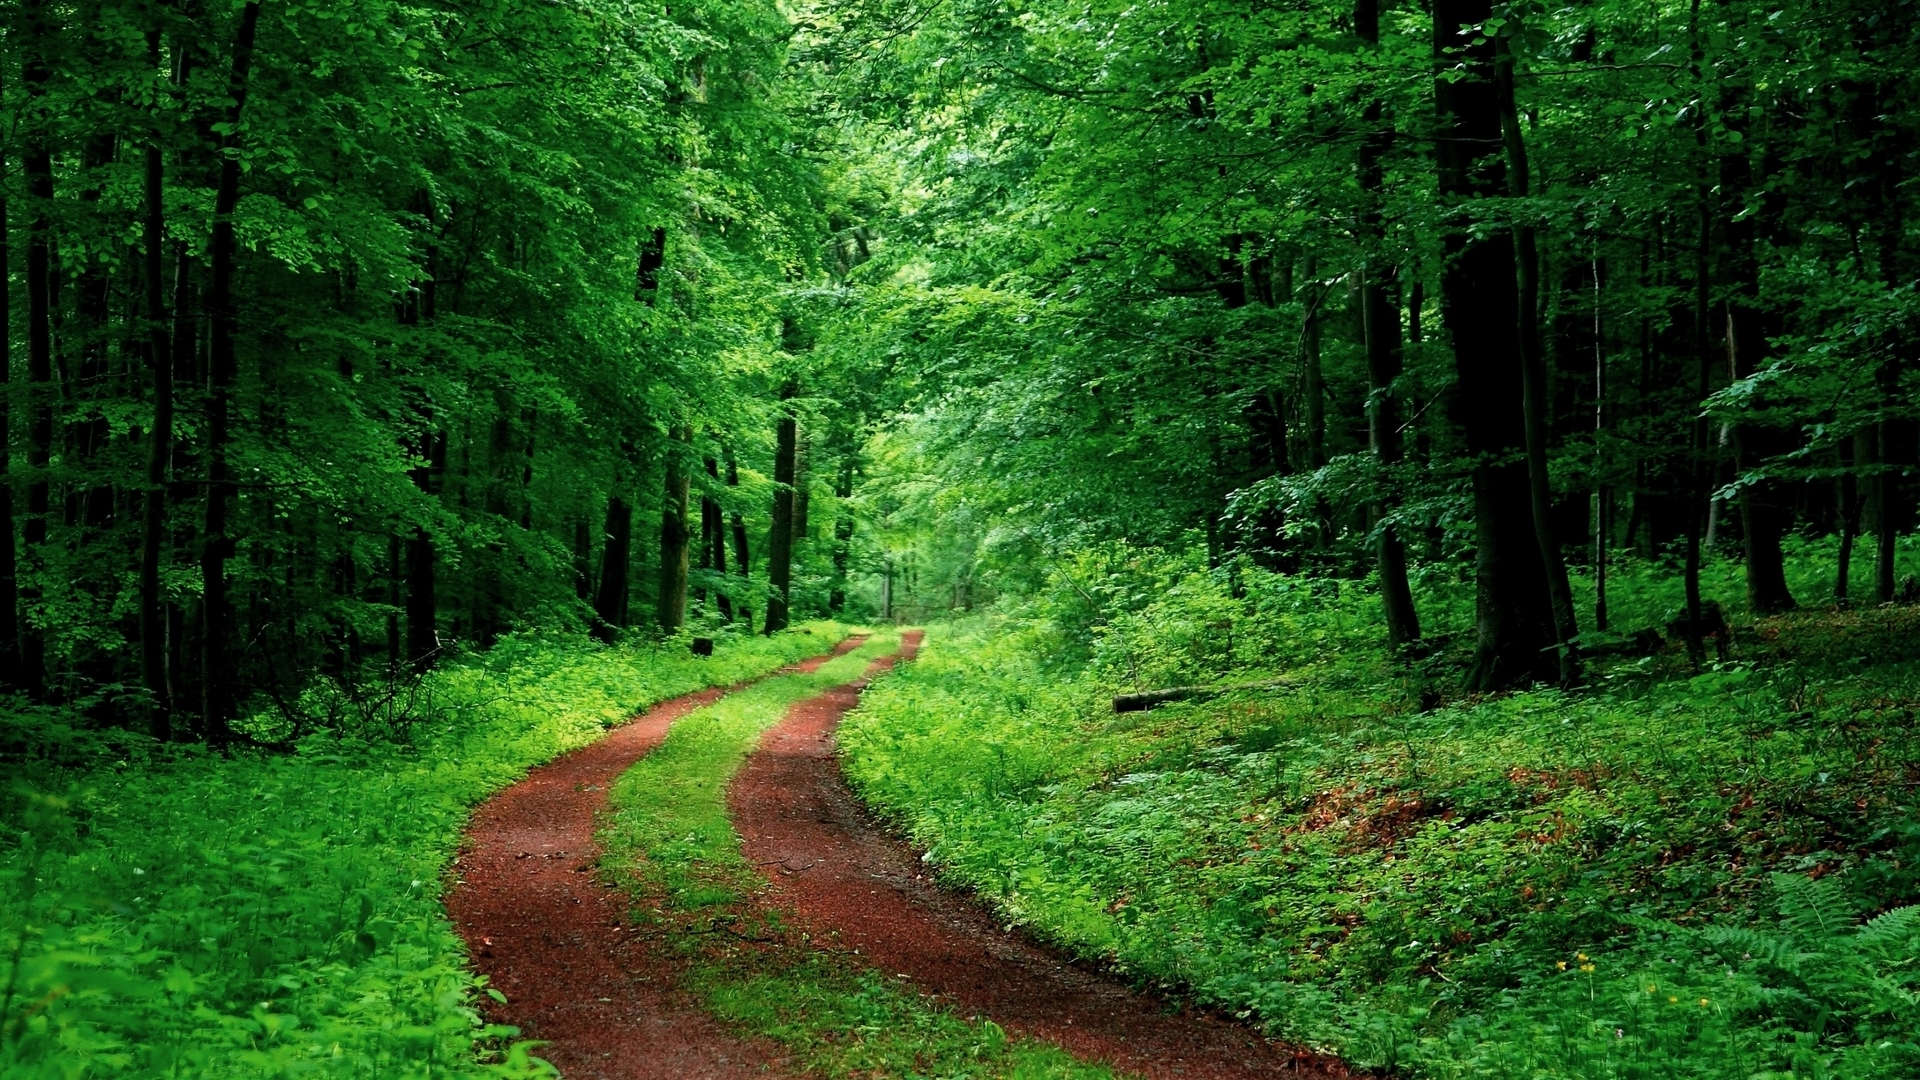 vegetation, green, nature, man made, path, forest, tree